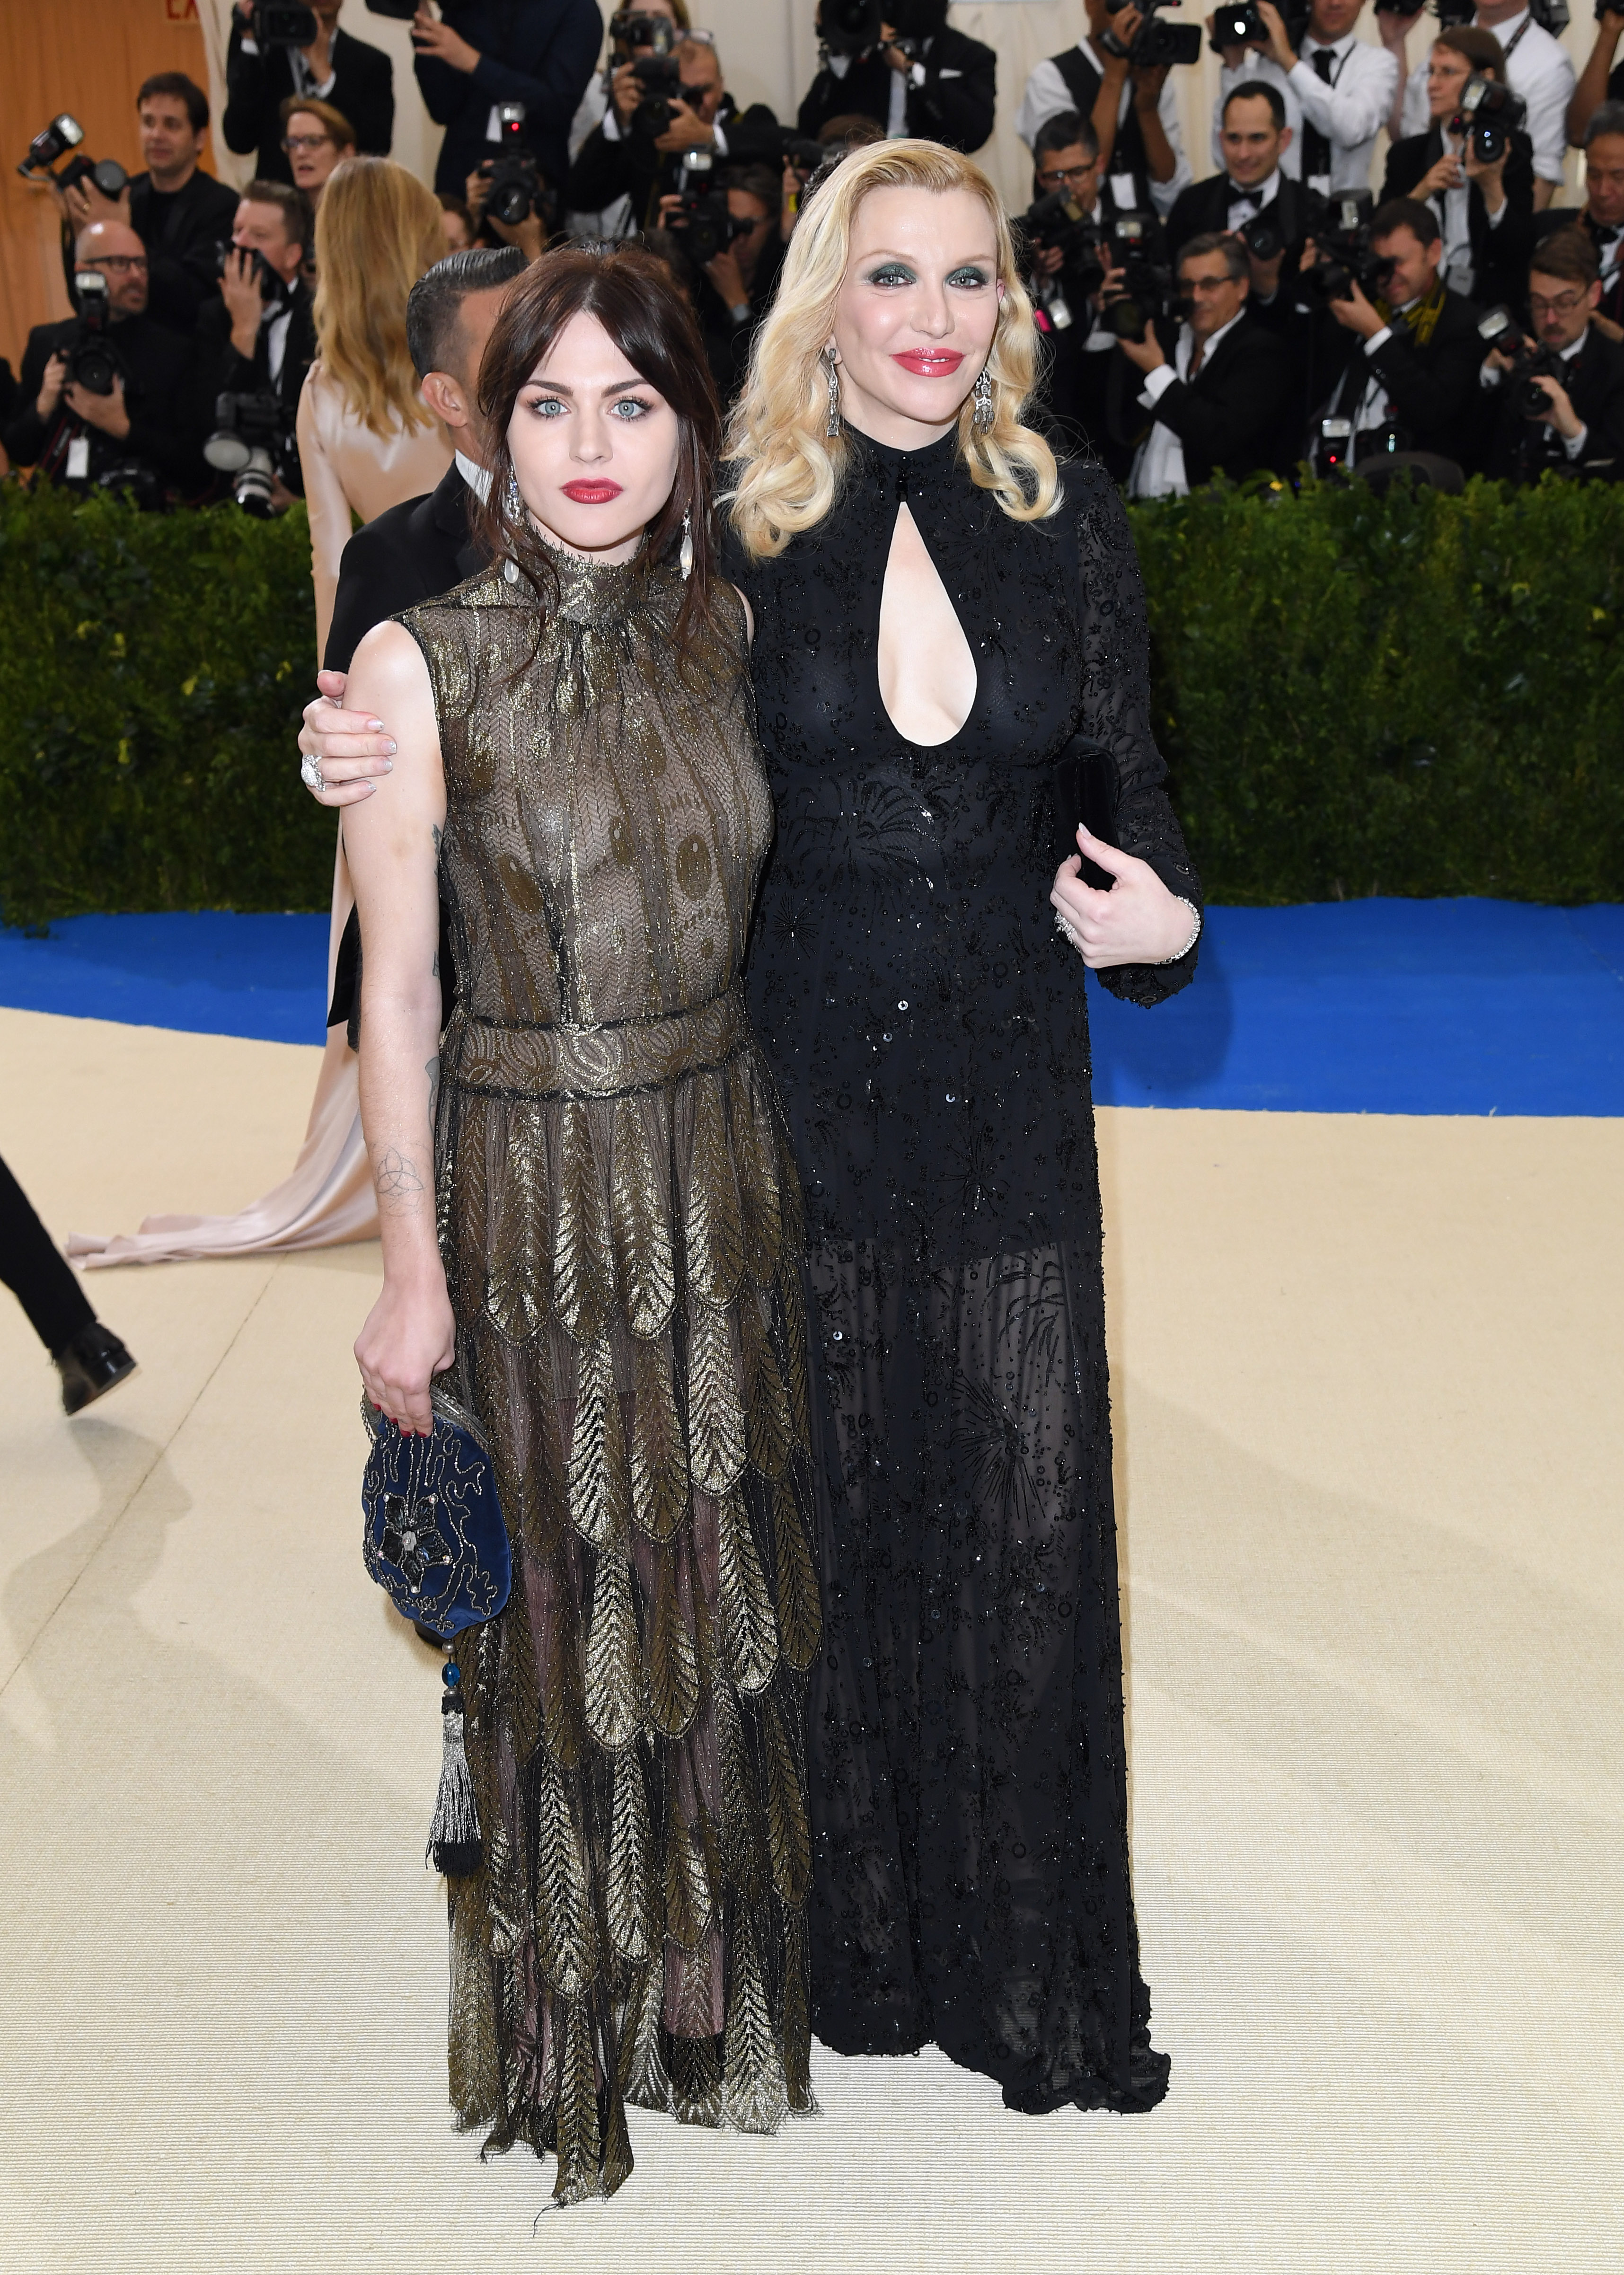 Frances Bean Cobain and Courtney Love attend the 